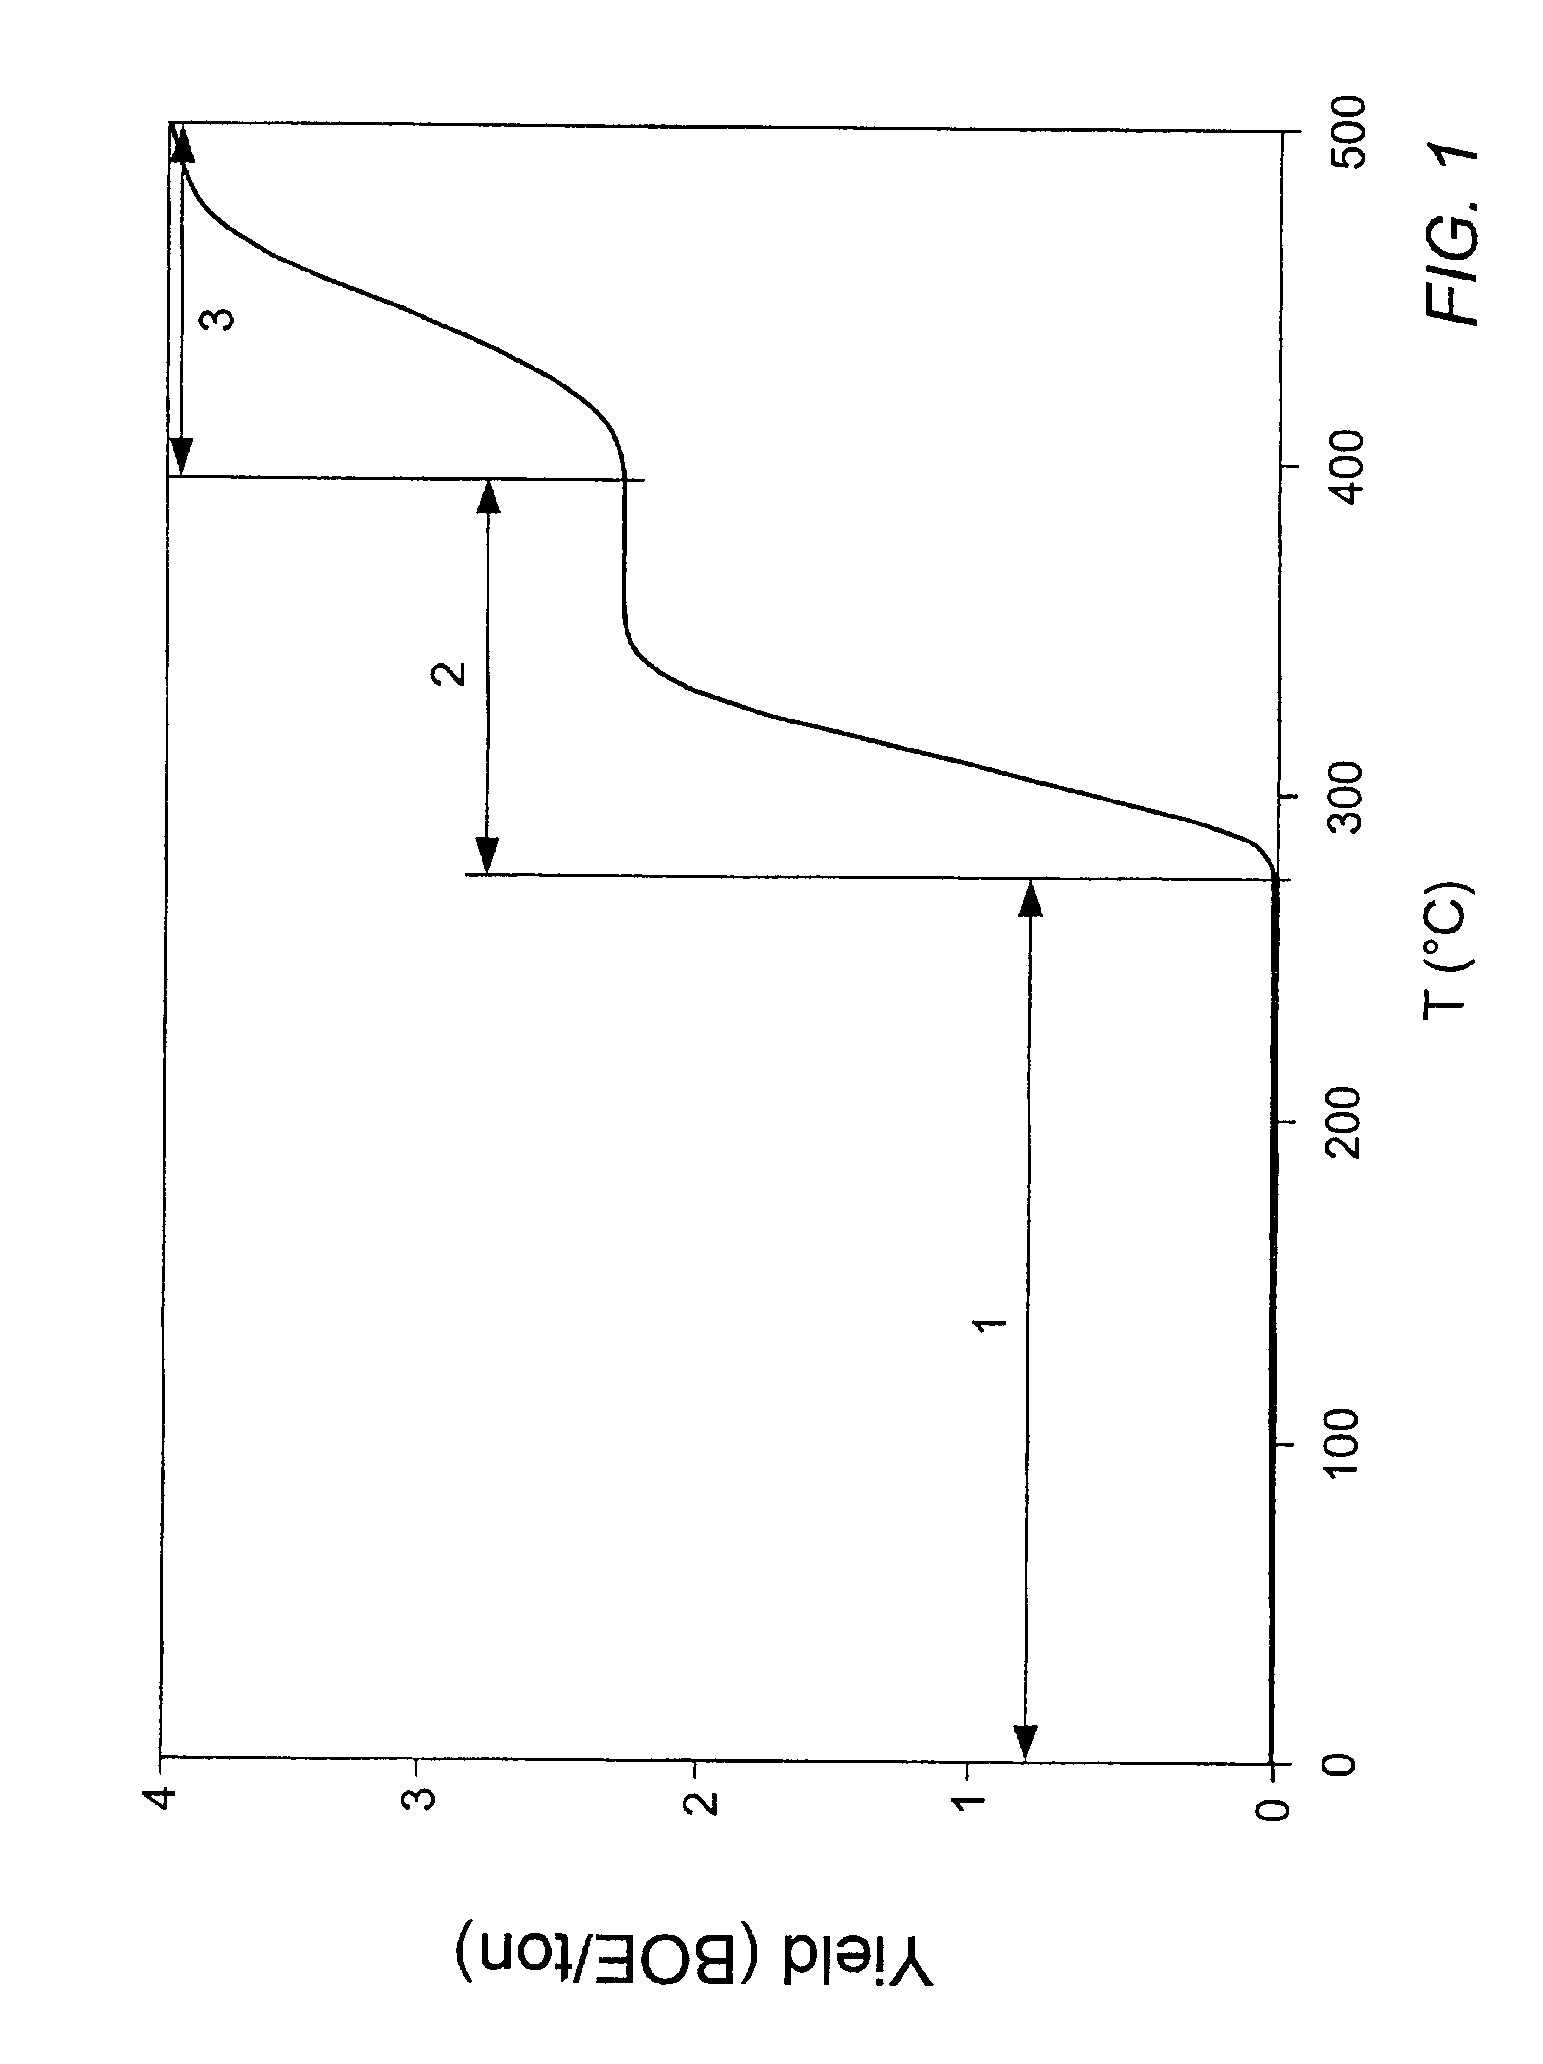 In situ thermal processing of a coal formation using a movable heating element